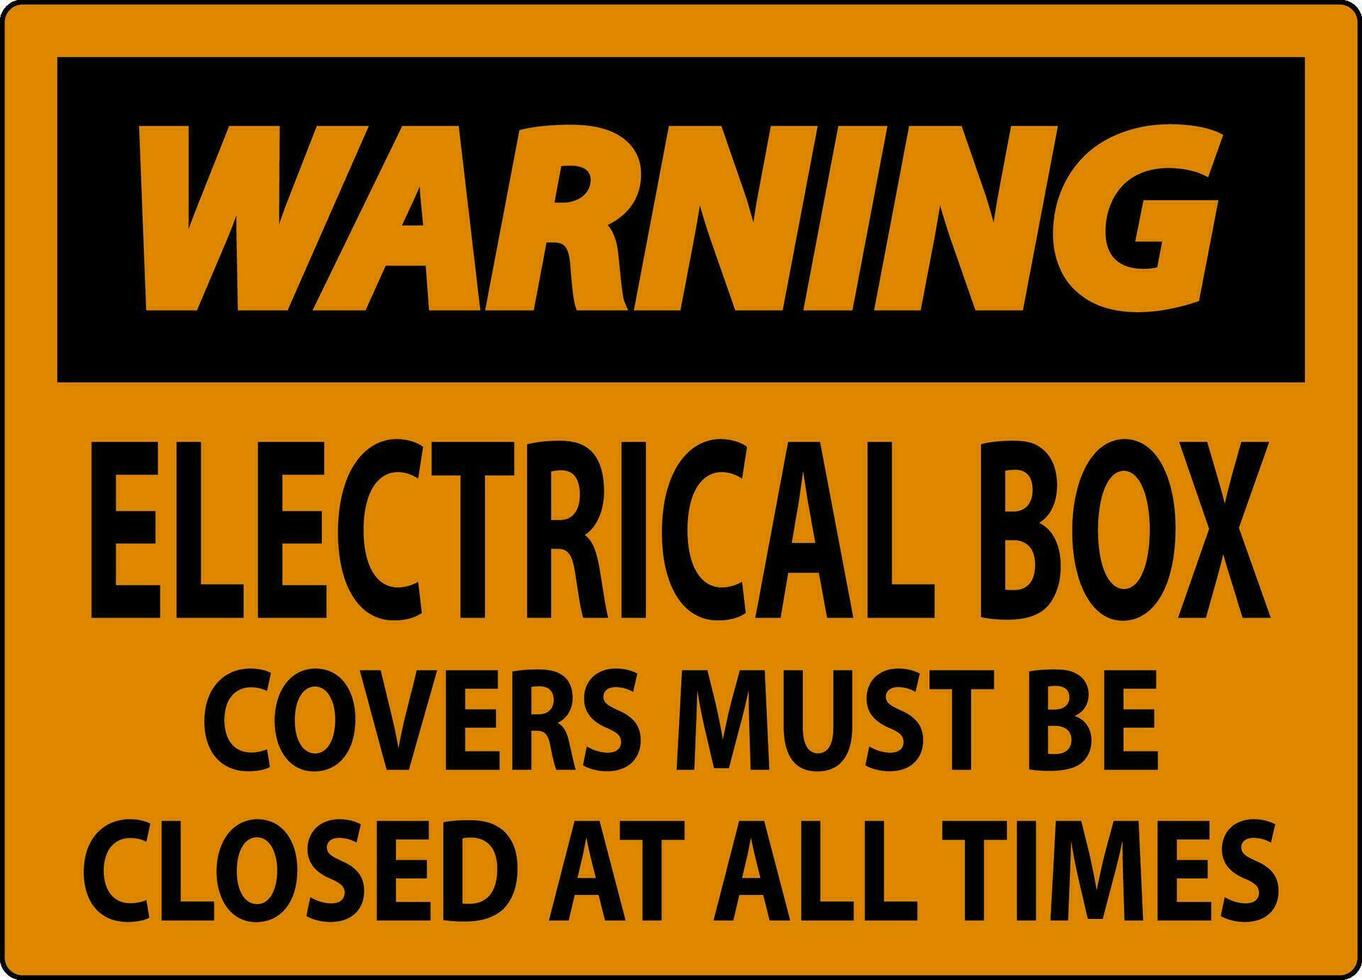 Warning Sign Electrical Box Covers Must Be Closed At All Times vector